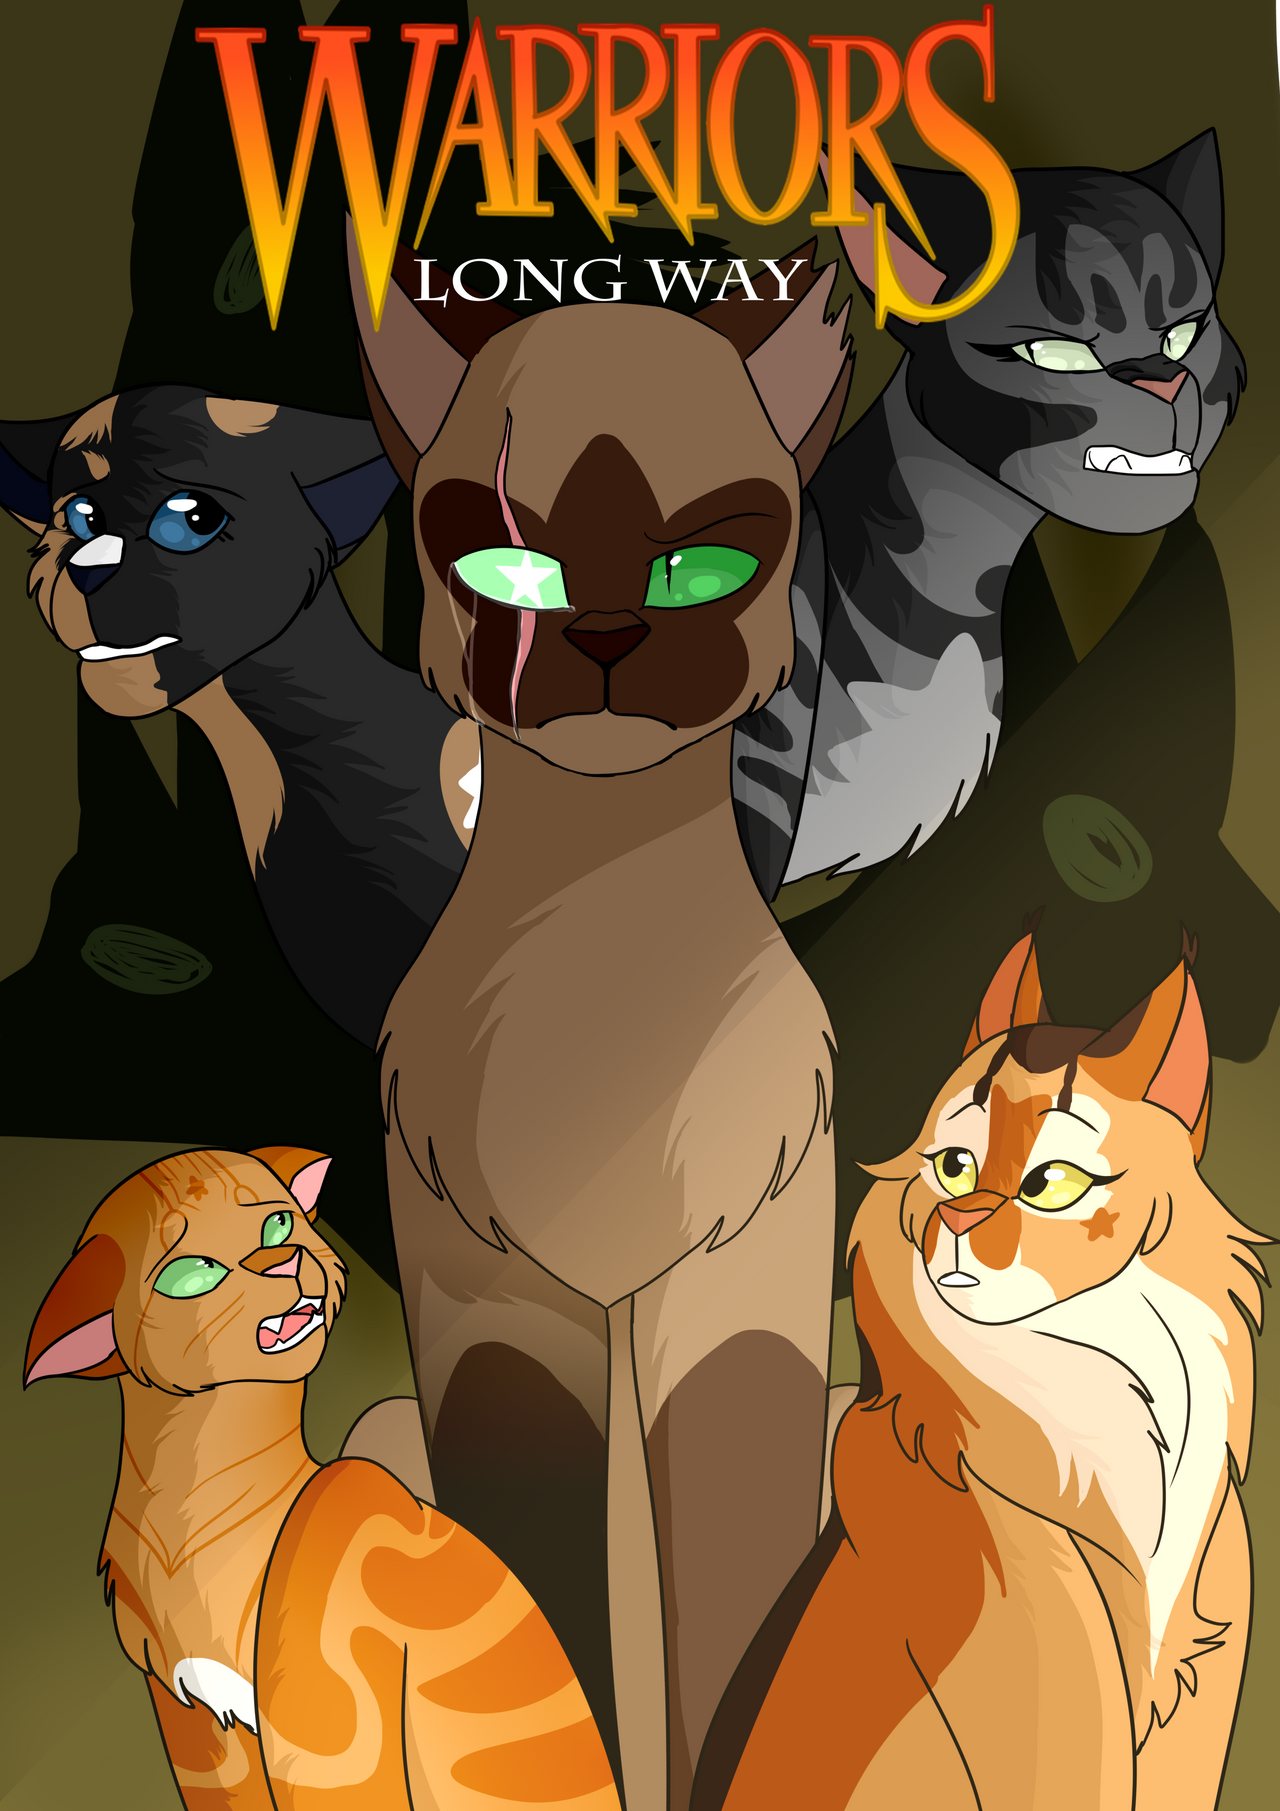 Warriors: The Darkest Hour by kuiwi on DeviantArt  Warrior cats books, Warrior  cats comics, Warrior cats movie